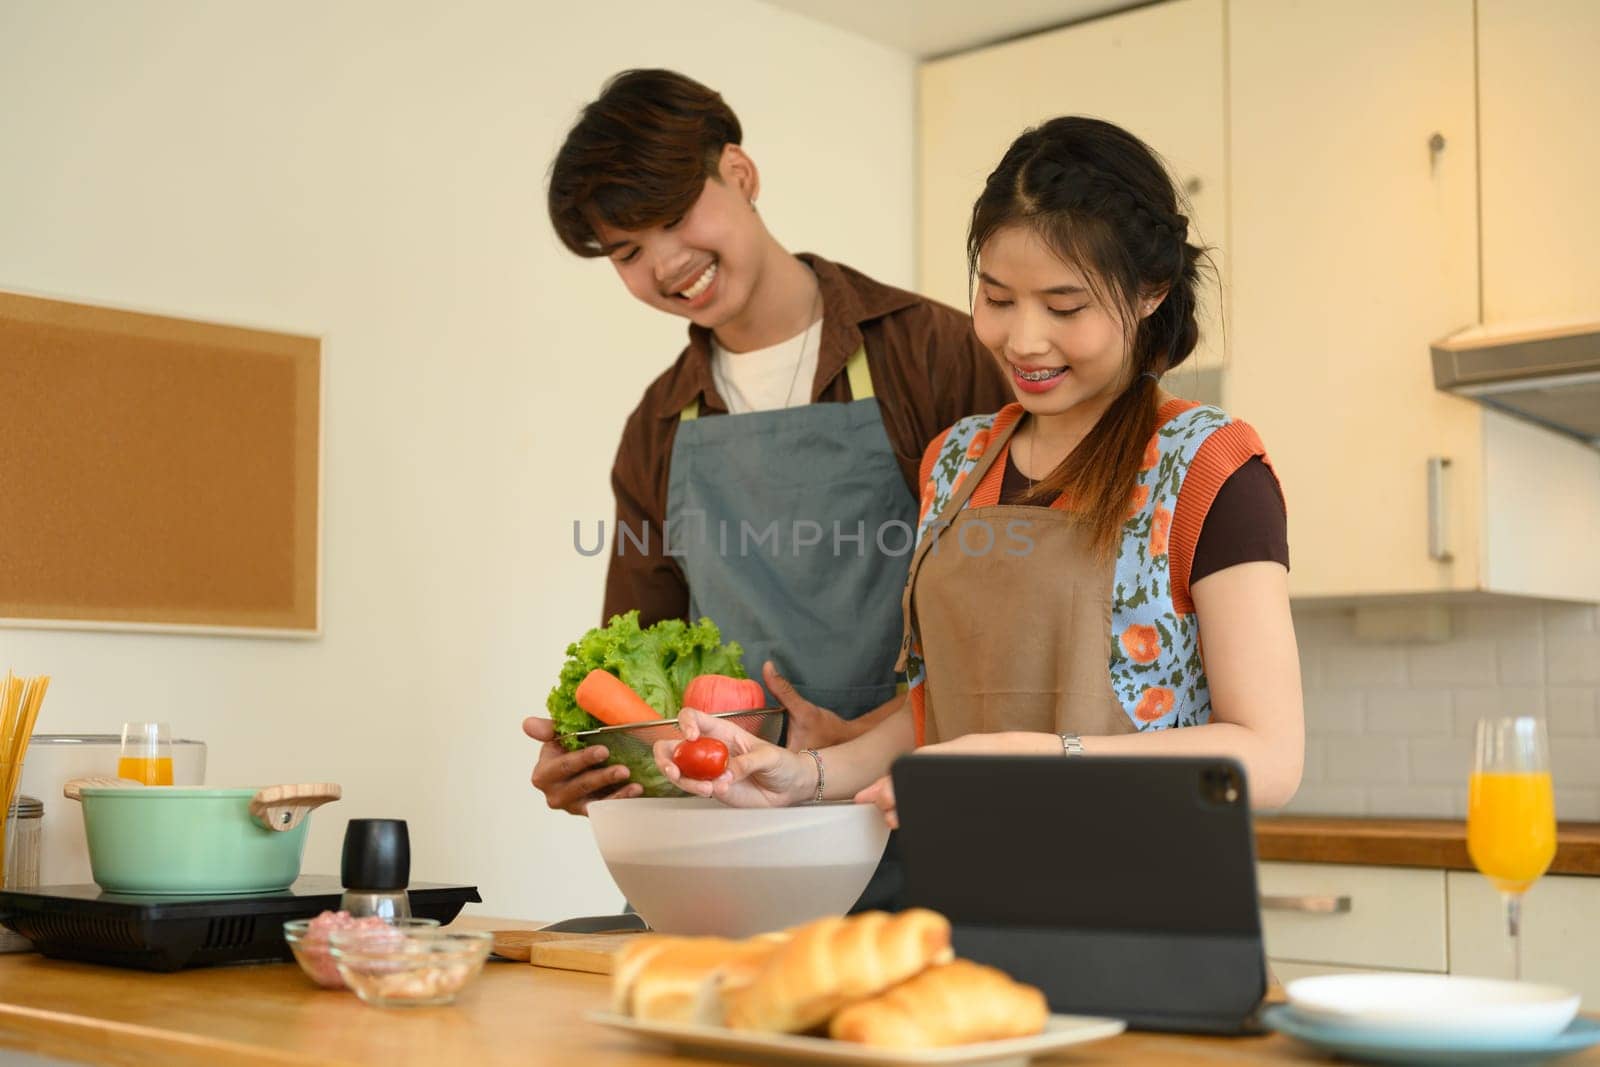 Young couple reading recipe from internet on digital tablet while cooking healthy food together in kitchen.